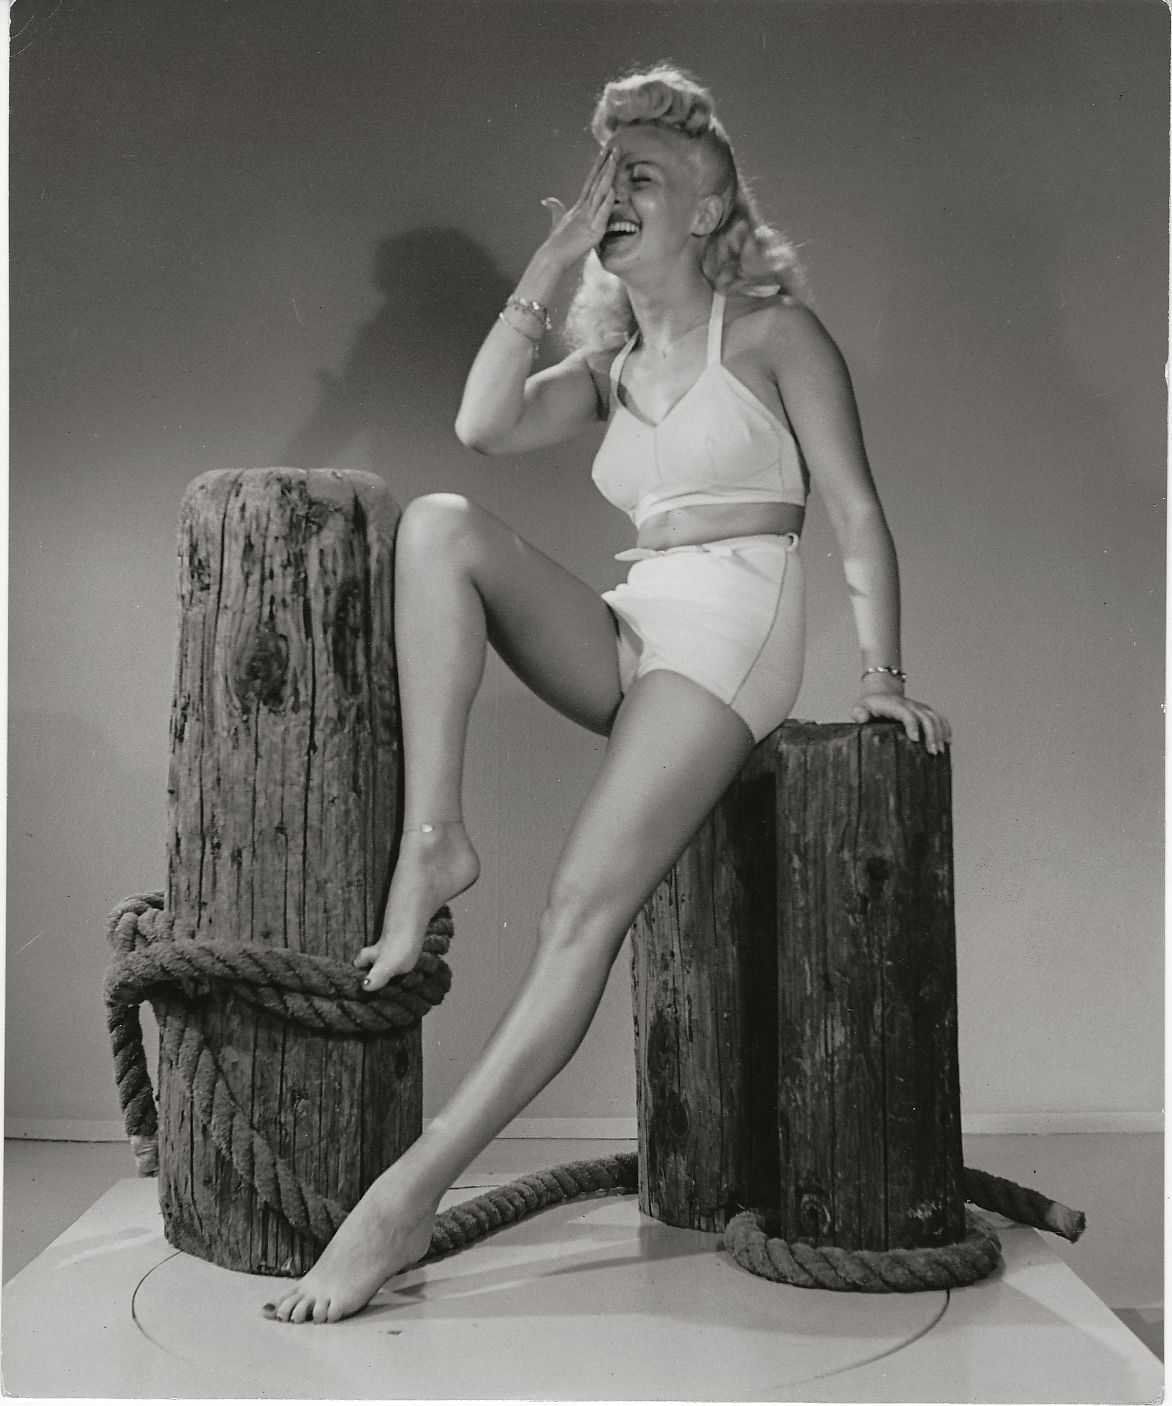 51 Hottest Betty Grable Bikini pictures Are An Embodiment Of Greatness 39